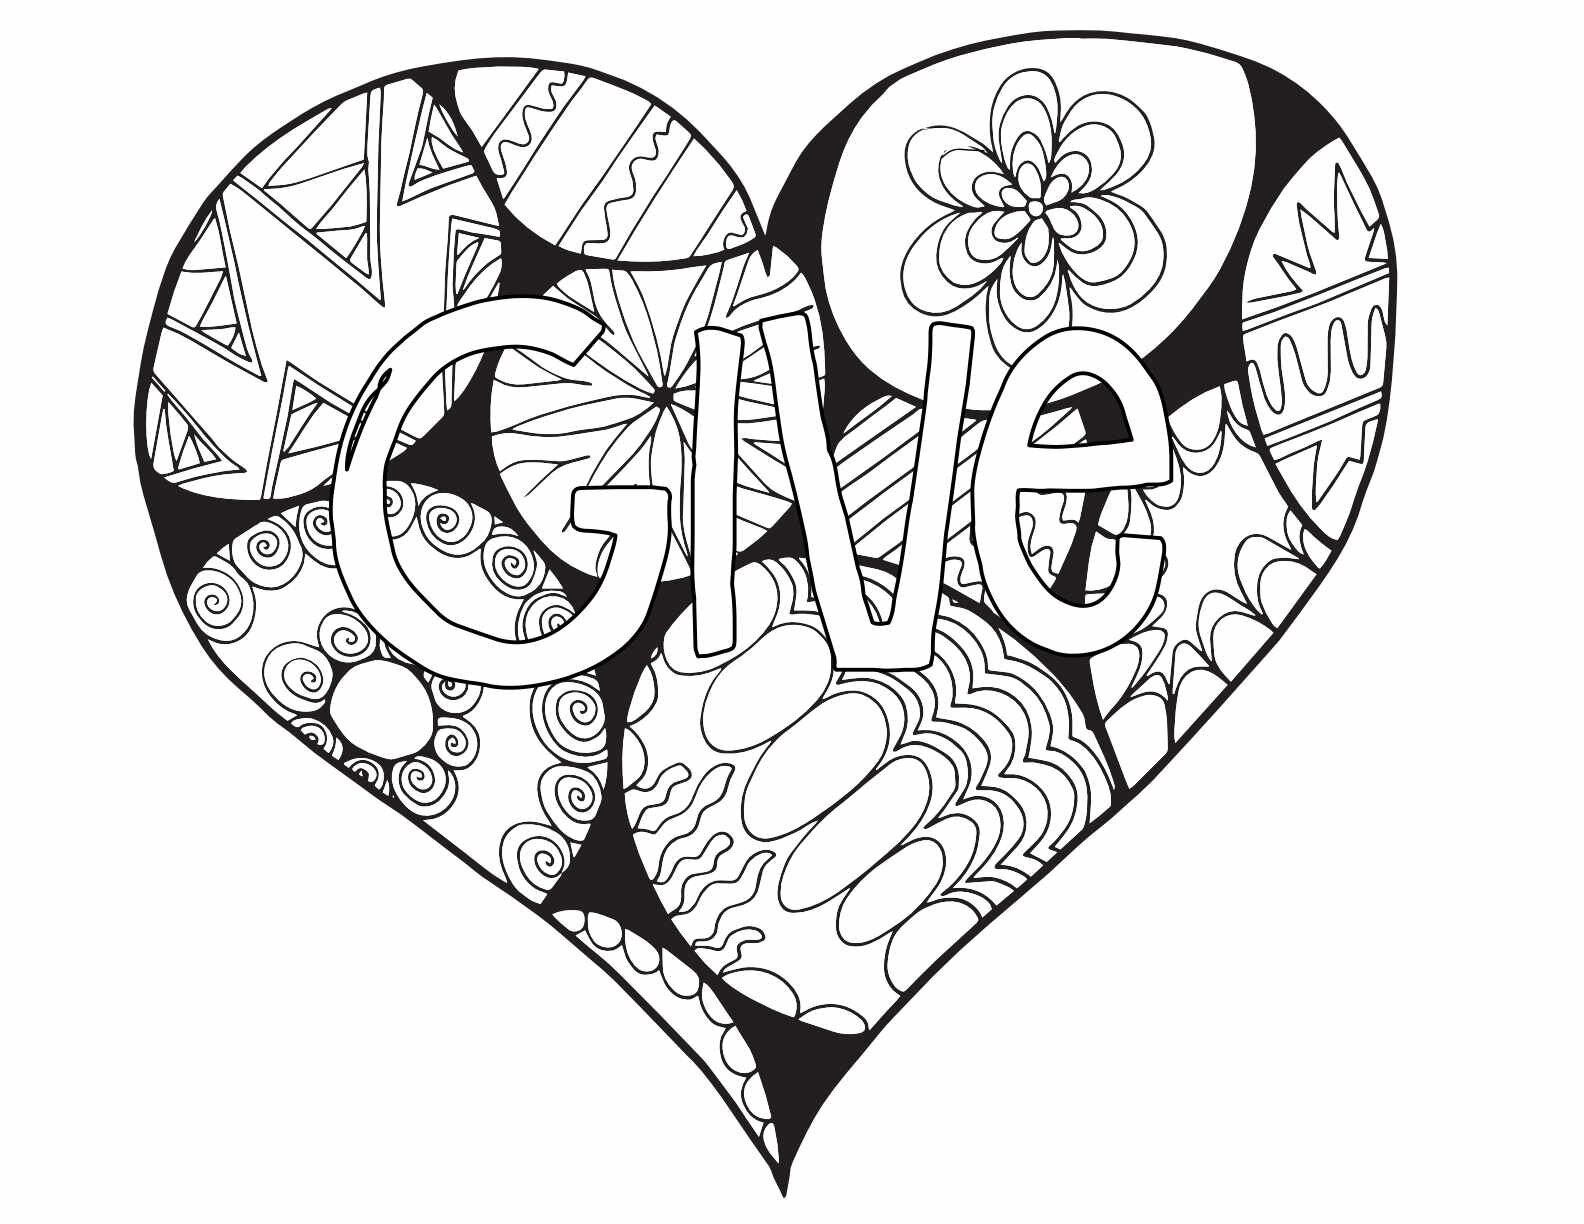 3 FREE GIVE PRINTABLE COLORING PAGES CLICK HERE TO DOWNLOAD THE PAGE ABOVE